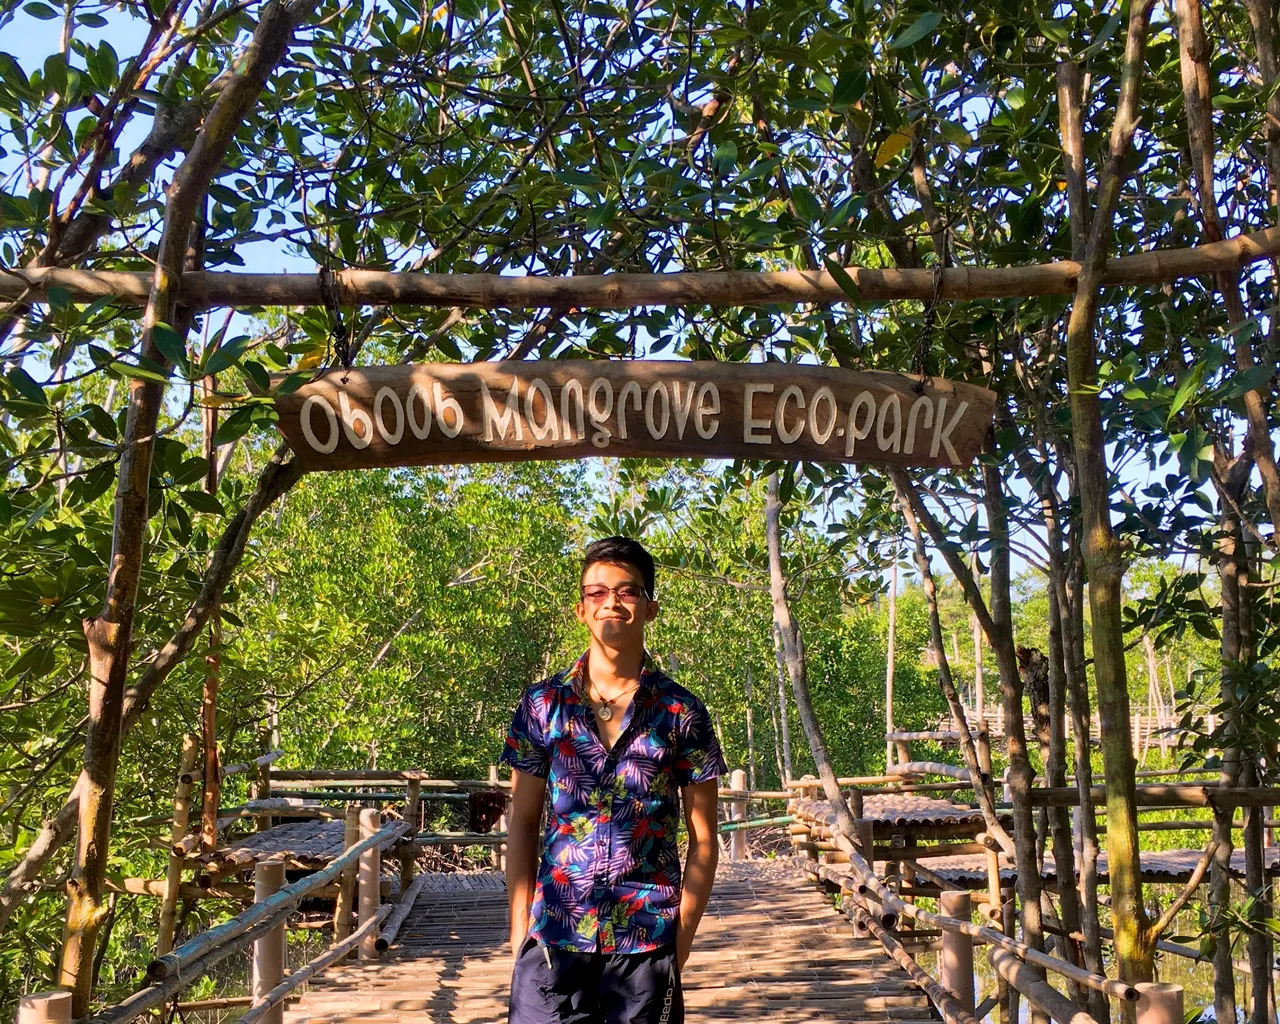 Excuse my smug face as I pose under the wooden banner of Oboob Mangrove Eco Park